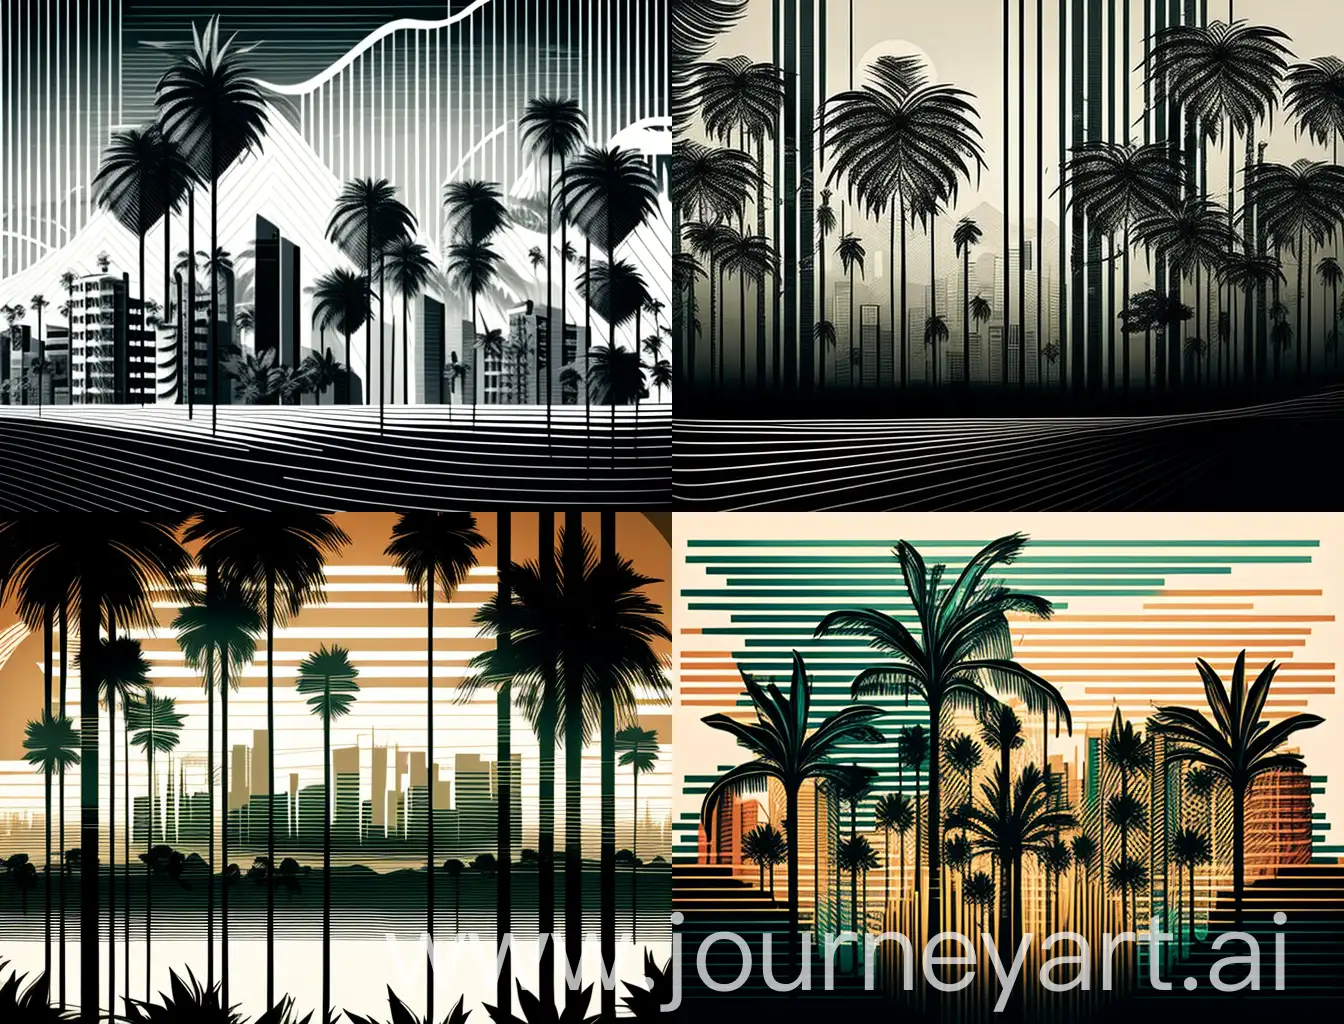 Vibrant-Urban-Cityscape-with-Coconut-Palm-Trees